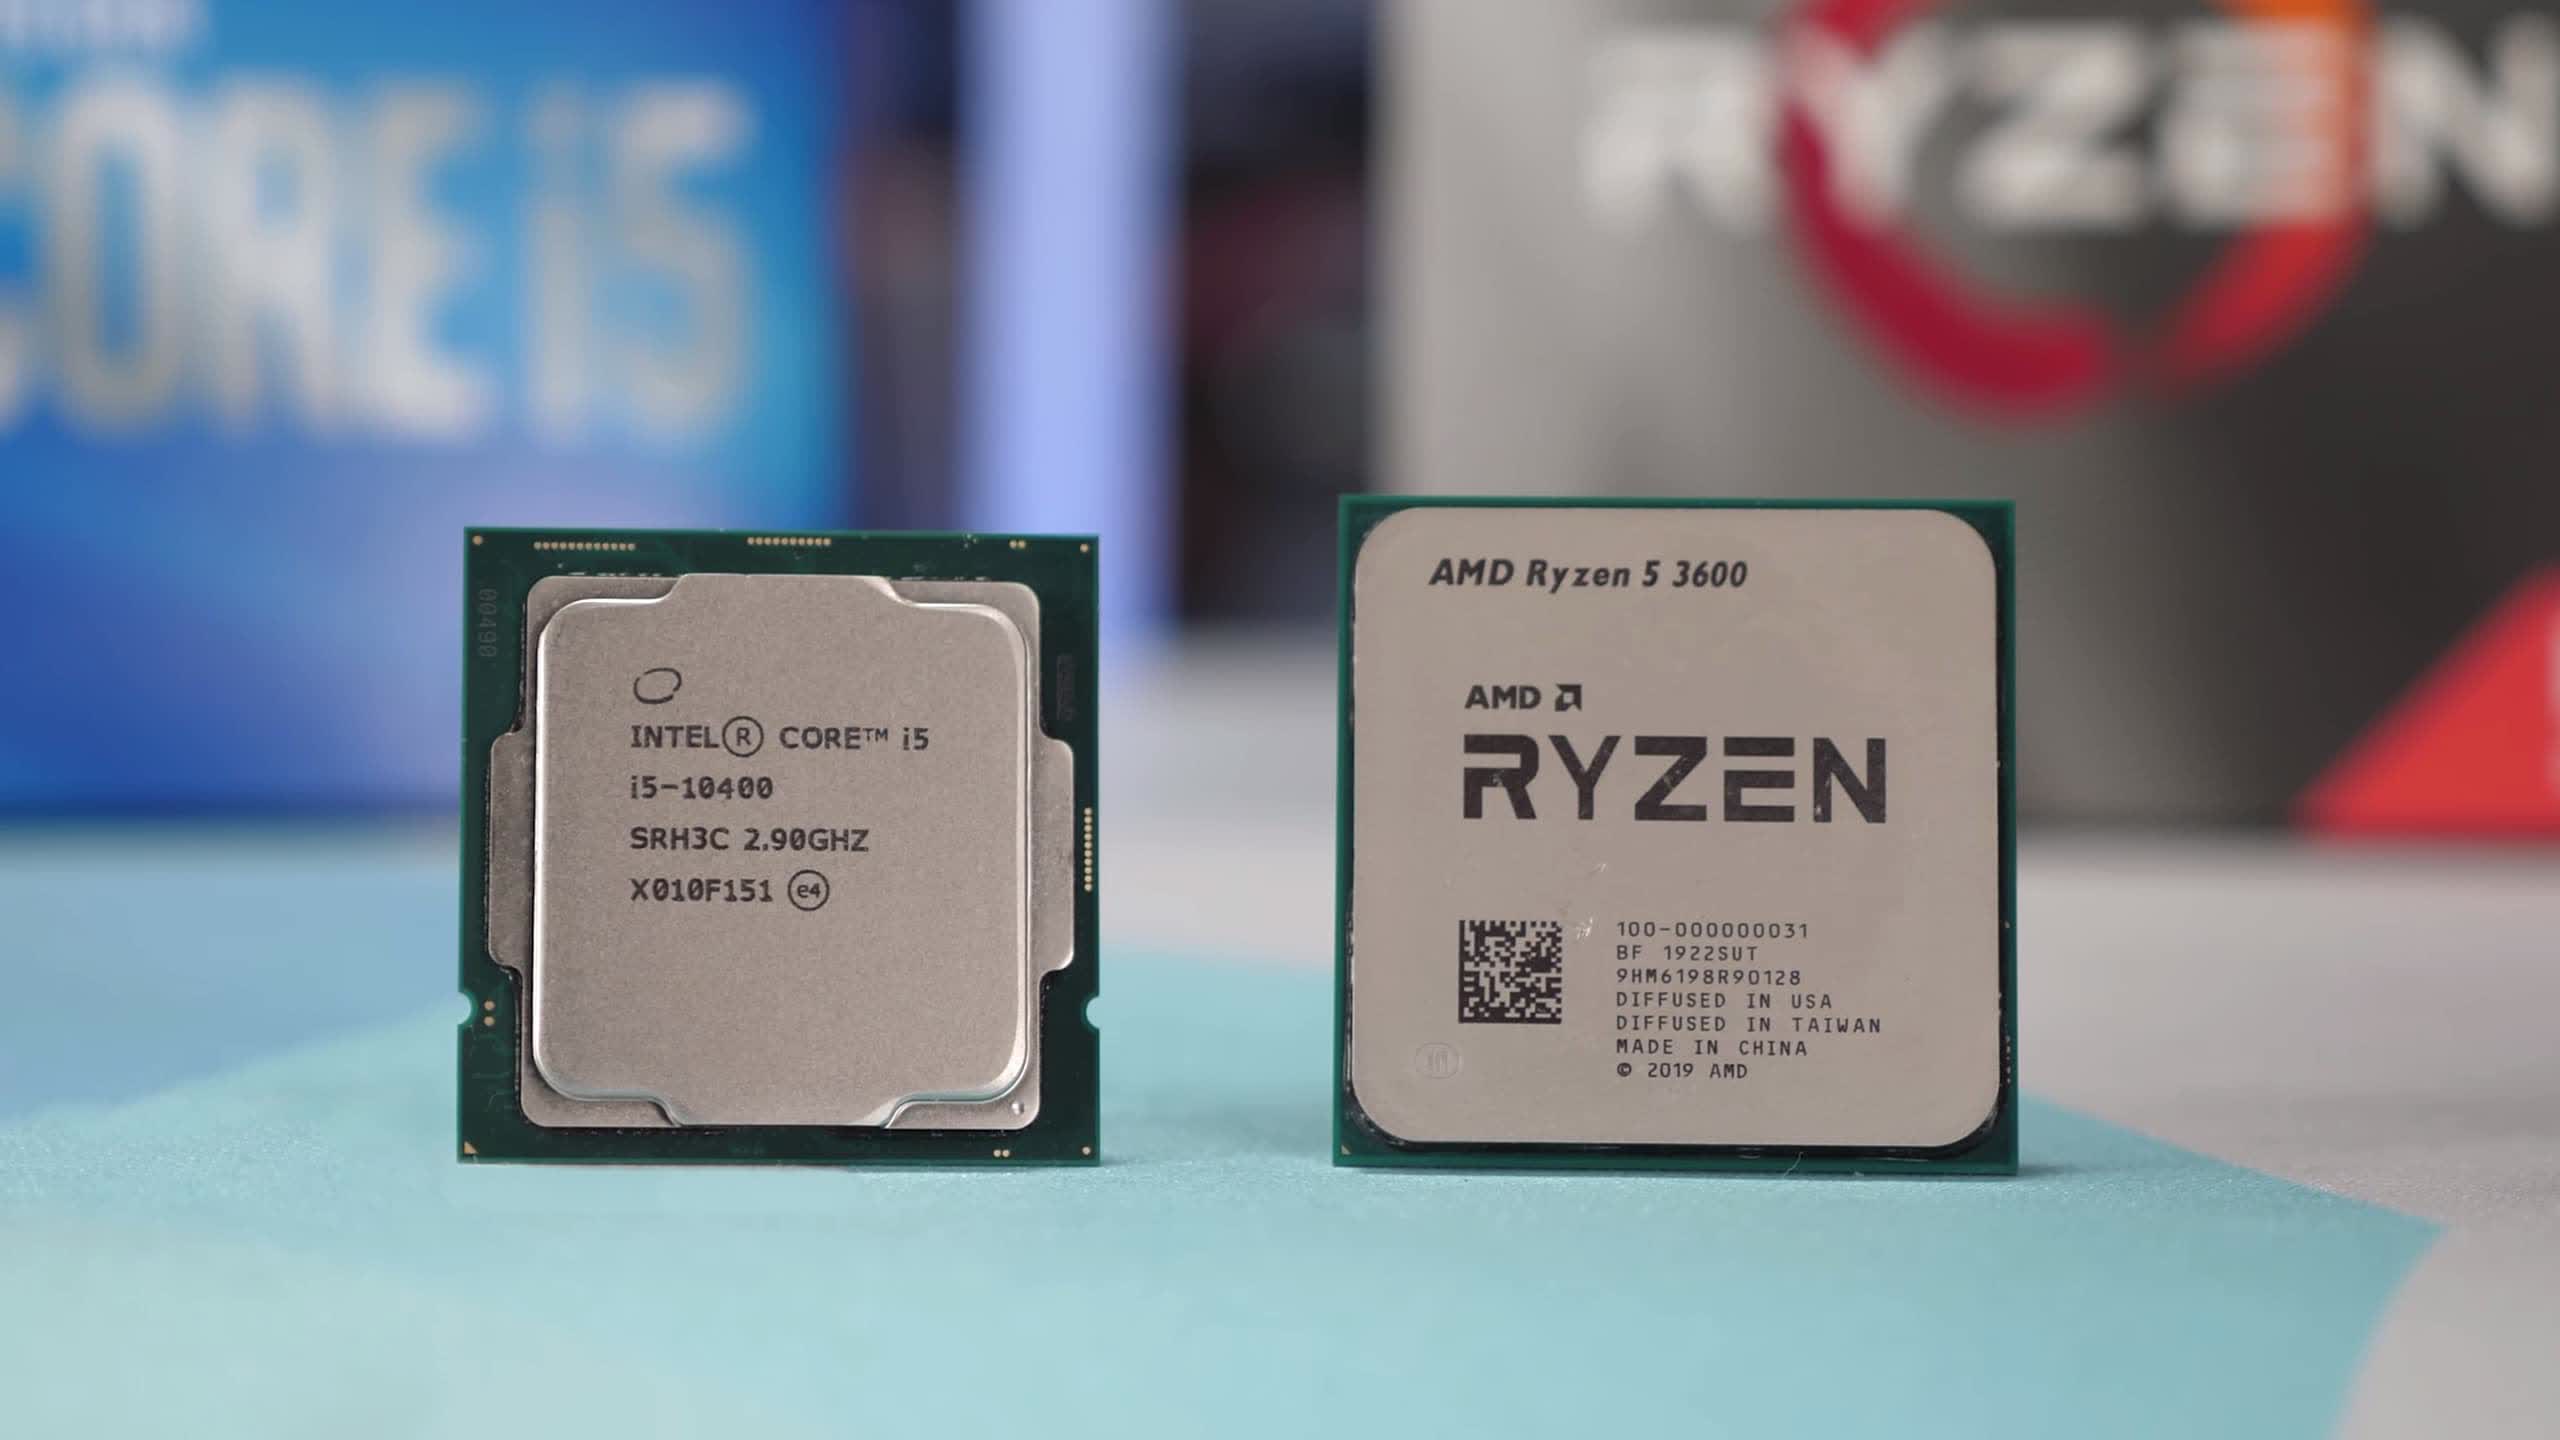 AMD Ryzen 5 3600 + Radeon RX 6800: Tested at 1080p, 1440p and 4K 